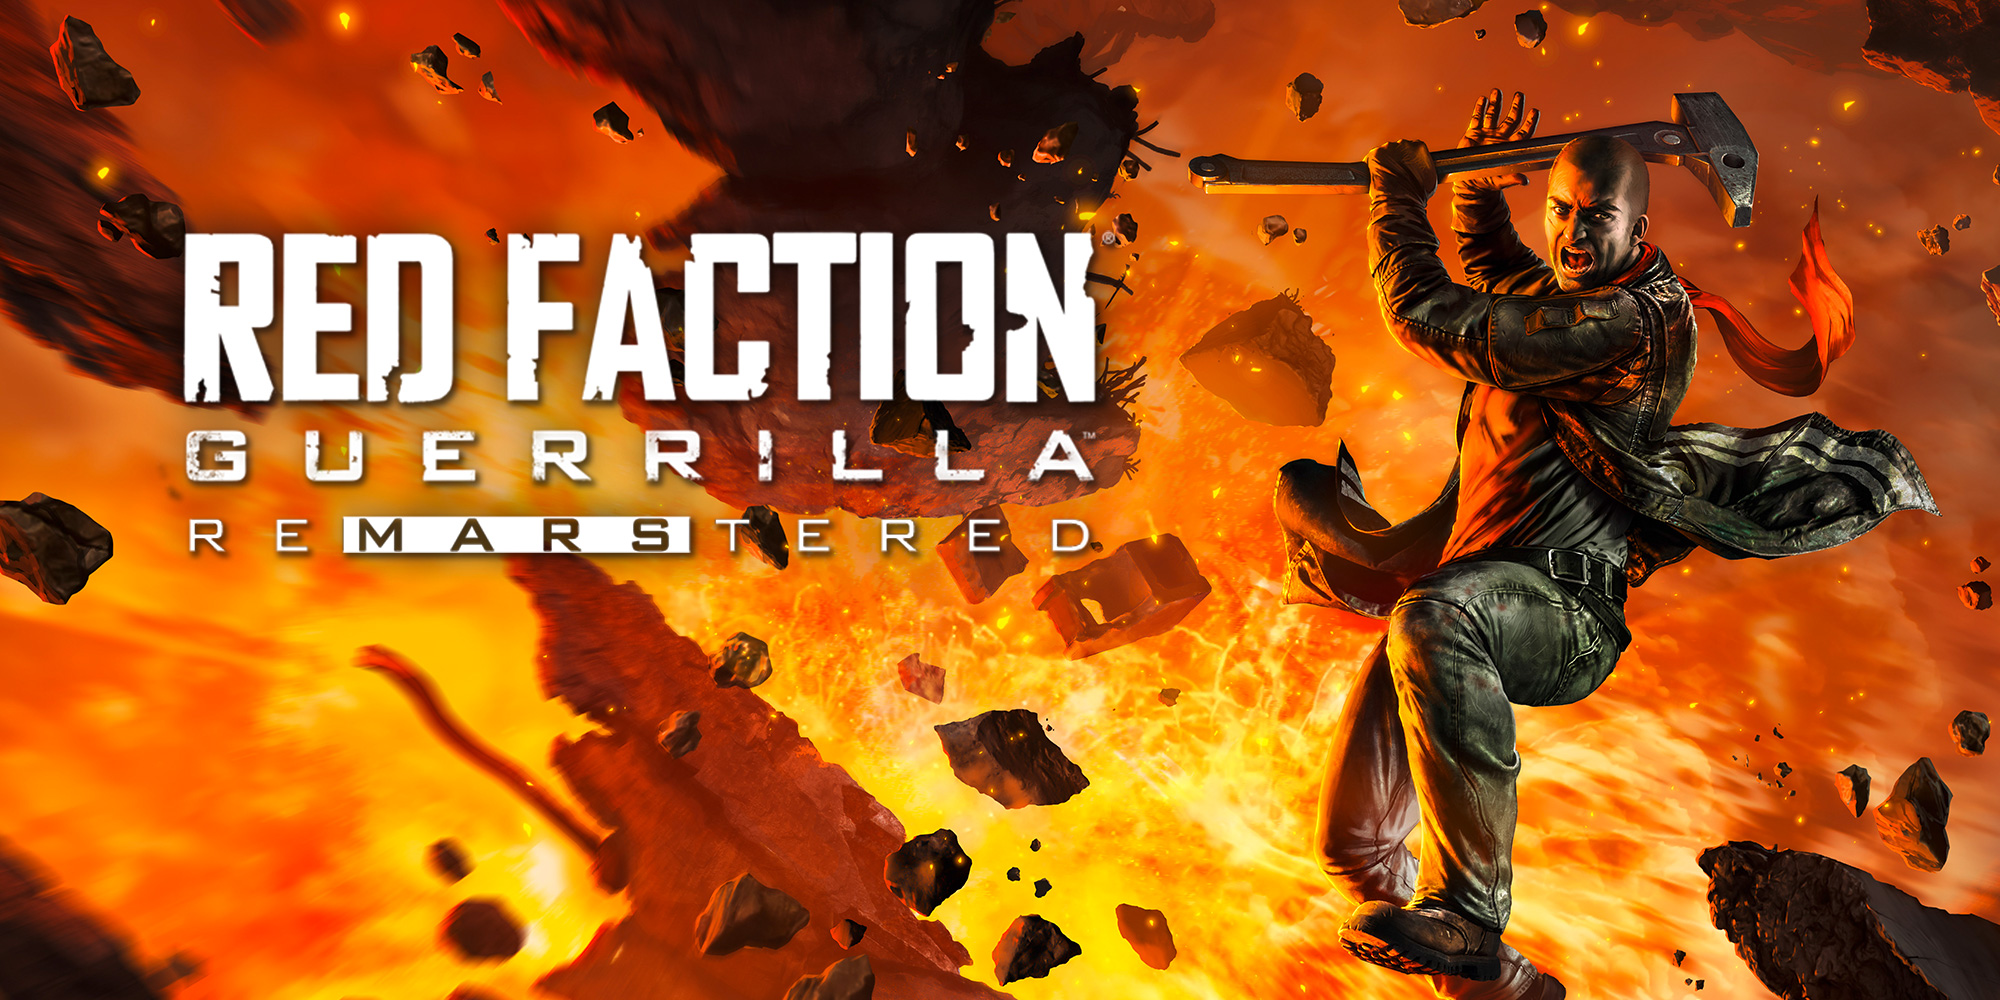 Red Faction Guerrilla Re-Mars-tered | Nintendo Switch games 